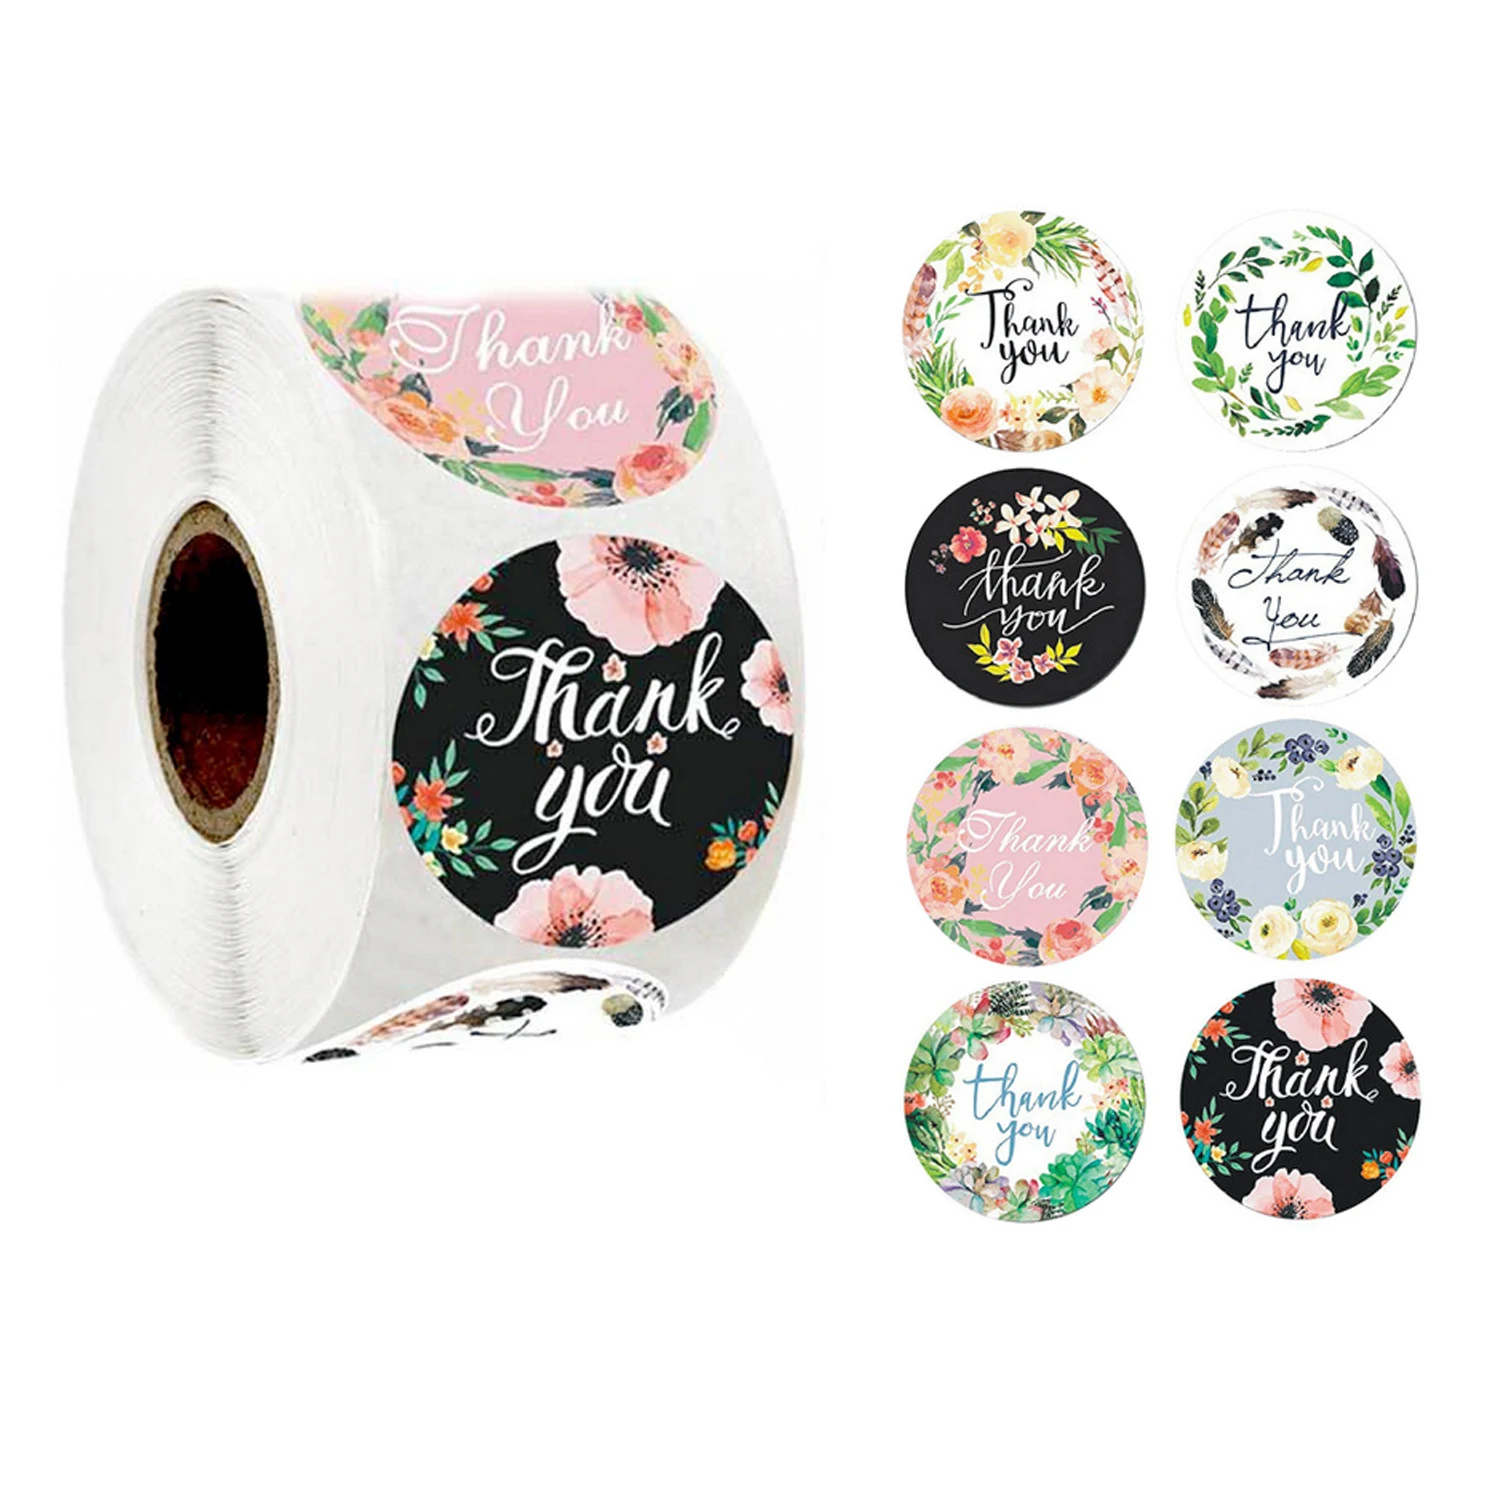 

500pcs Thank You Stickers Roll Floral Holographic Envelope Sticker Seals 1'' for Supporting My Small Business Sticker Labels